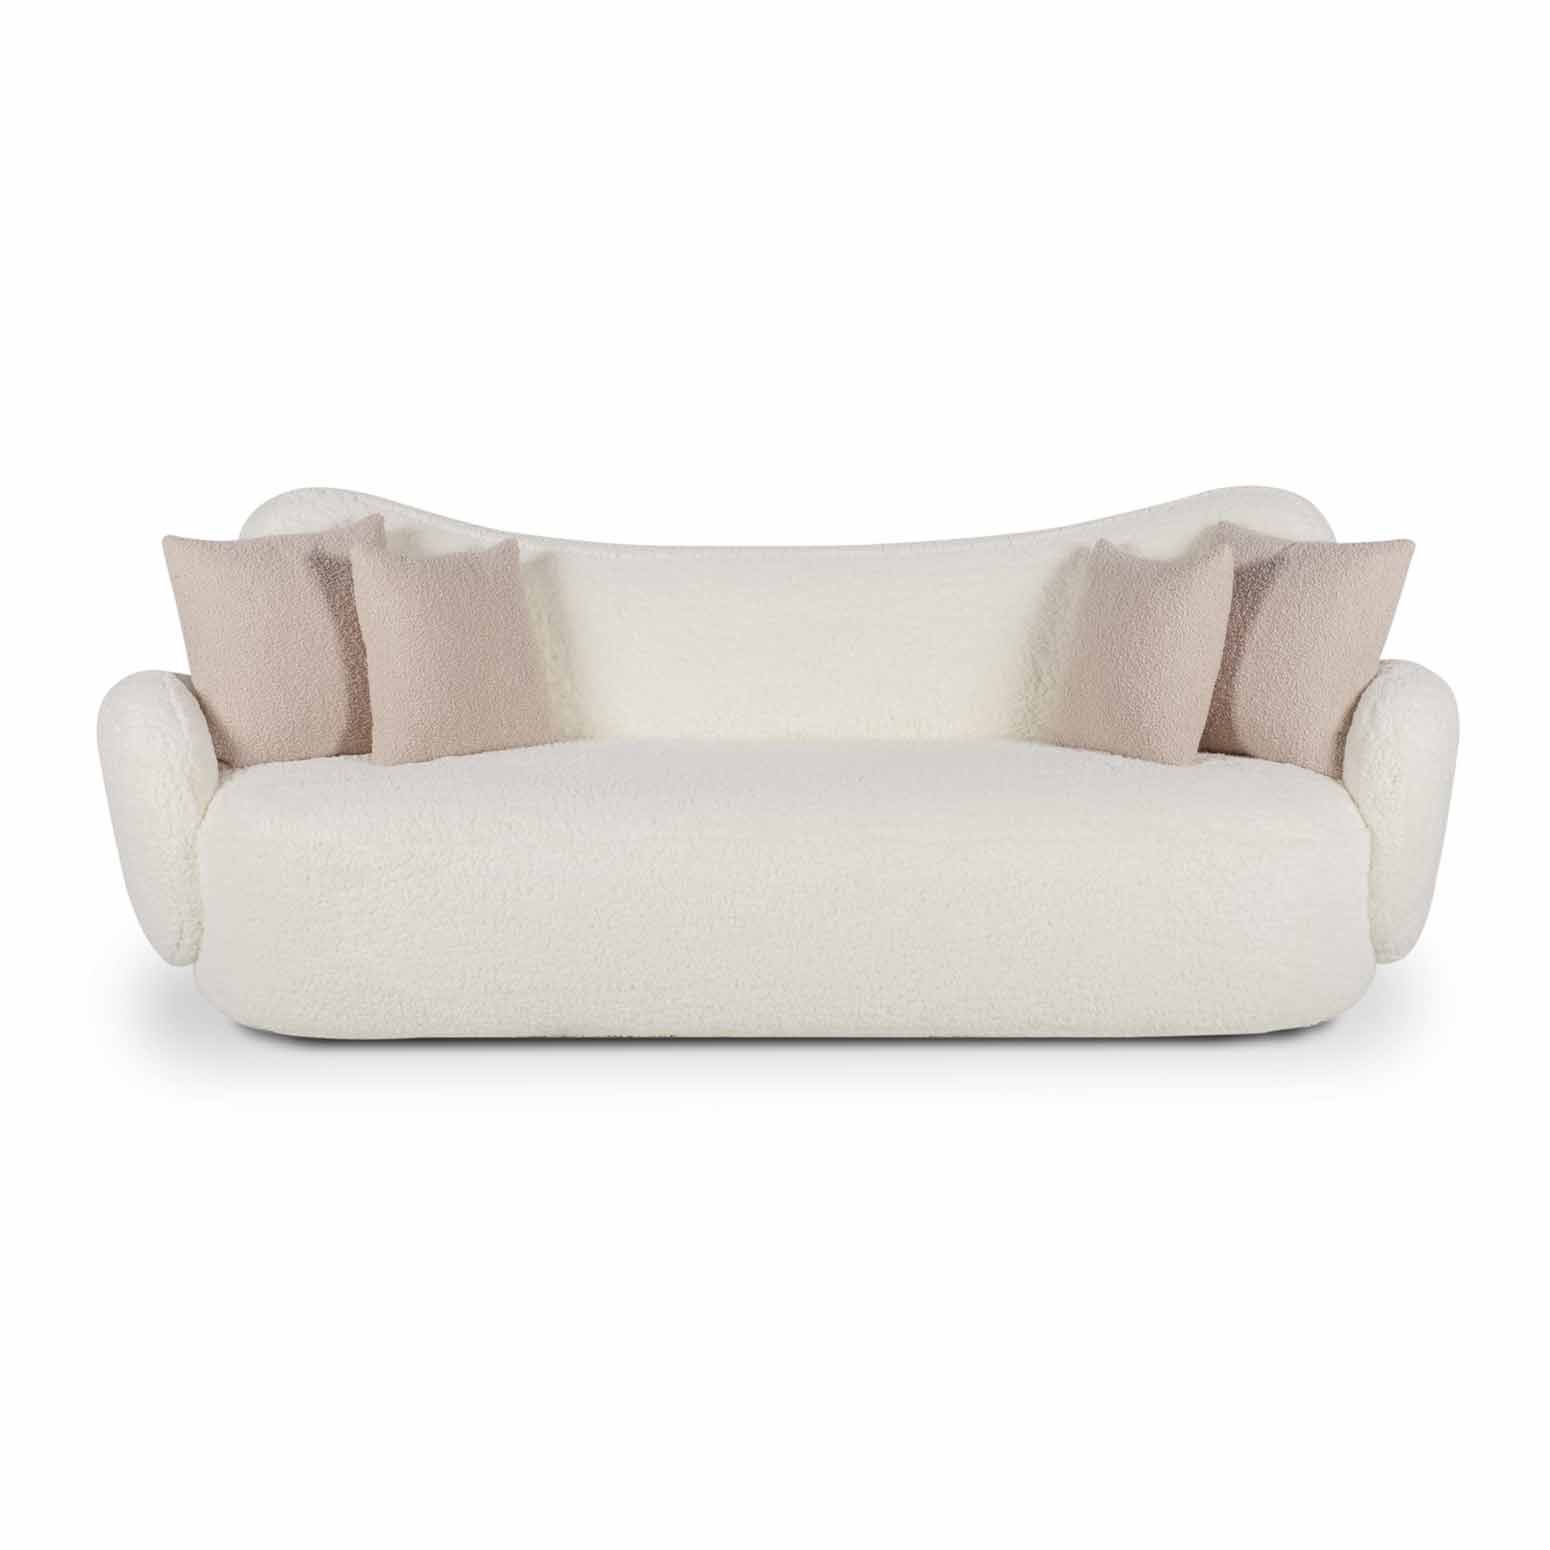 You are currently viewing Conchula Curved Sofa